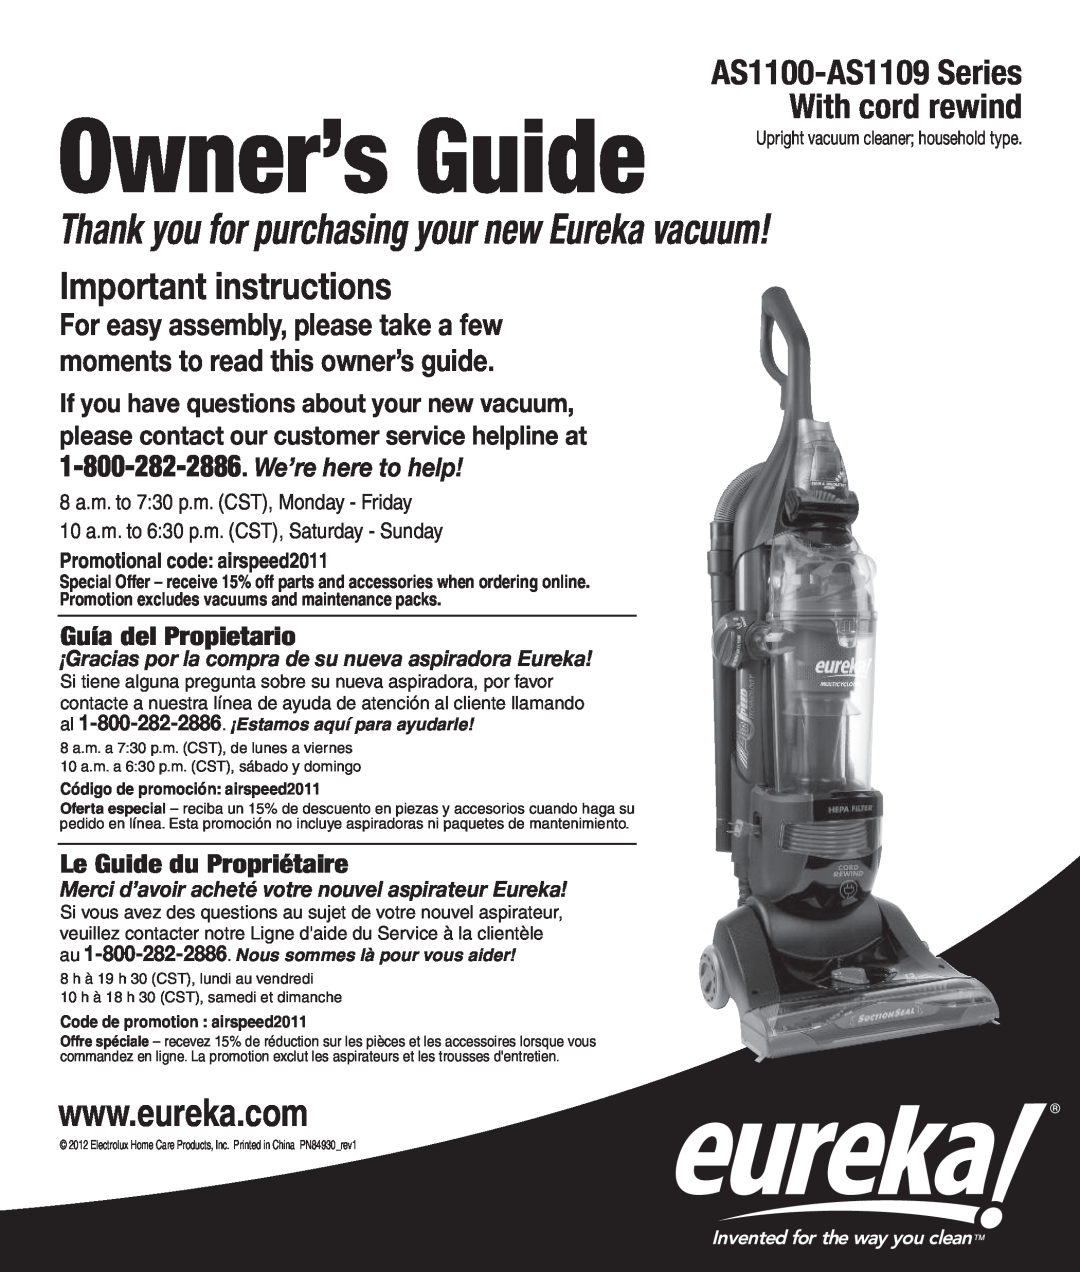 Eureka AS1001A manual 8 a.m. to 730 p.m. CST, Monday - Friday, 10 a.m. to 630 p.m. CST, Saturday - Sunday, Owner’s Guide 